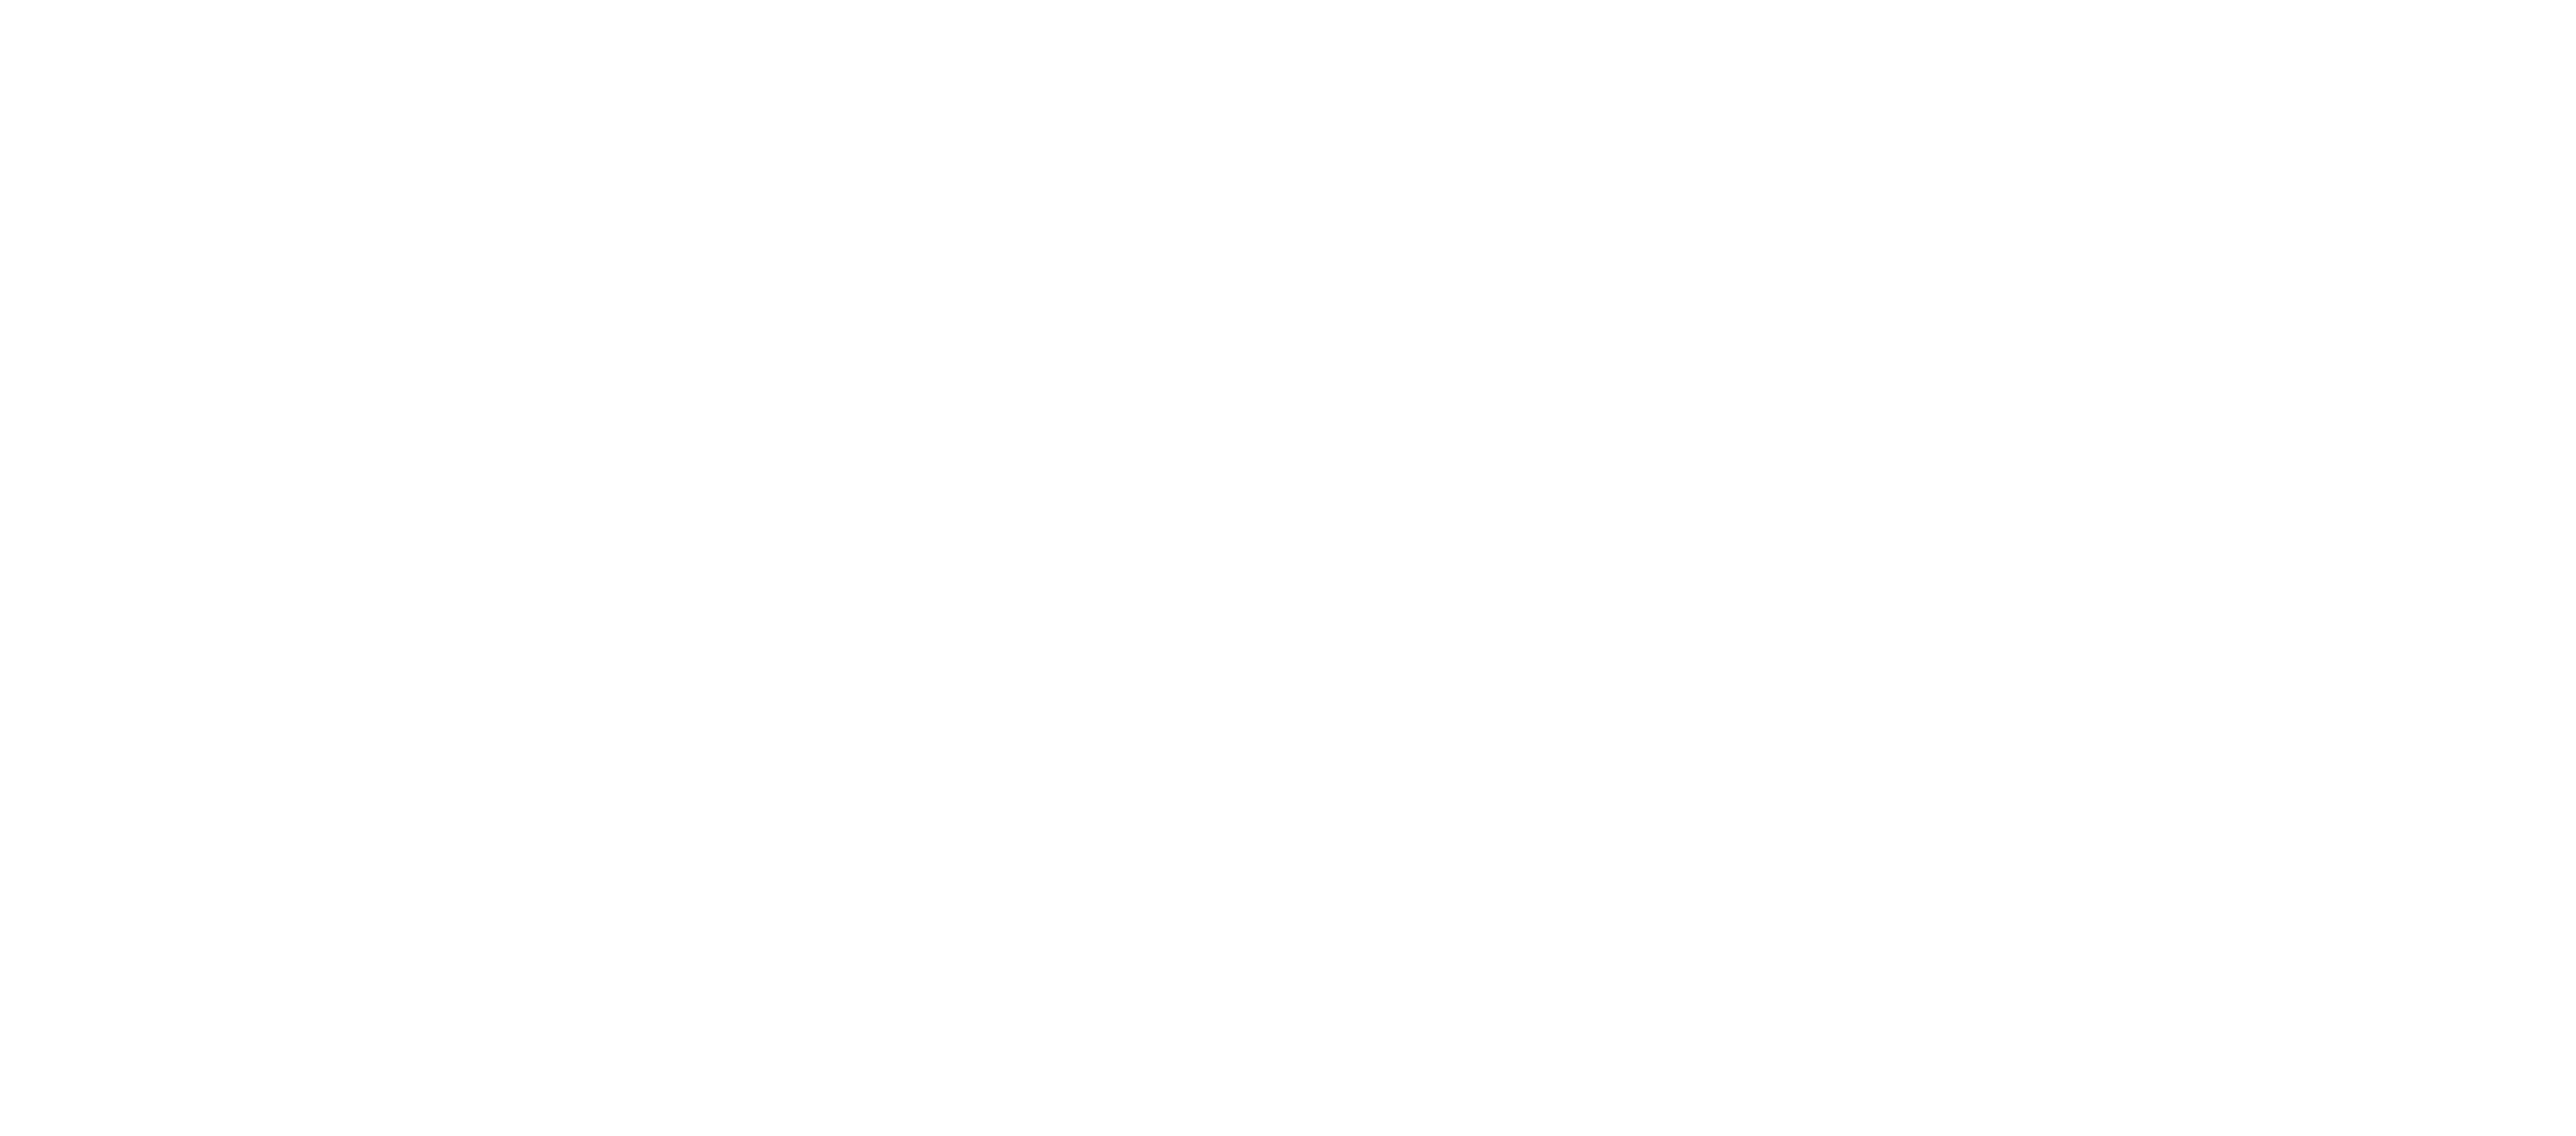 ICELAND, GREENLAND, the FAROE ISLANDS and SVALBARD | Wendy Perrin's WOW LIST Trusted Travel Expert | Condé Nast Traveler's Iceland Specialist | Condé Nast Traveler's 'Trip of a Lifetime' | Certified INSPIRED BY ICELAND Specialist | Town & Country Travel Advisor | MSN's Top 15 Travel Expert | Le Monde Contributor | Since 2007